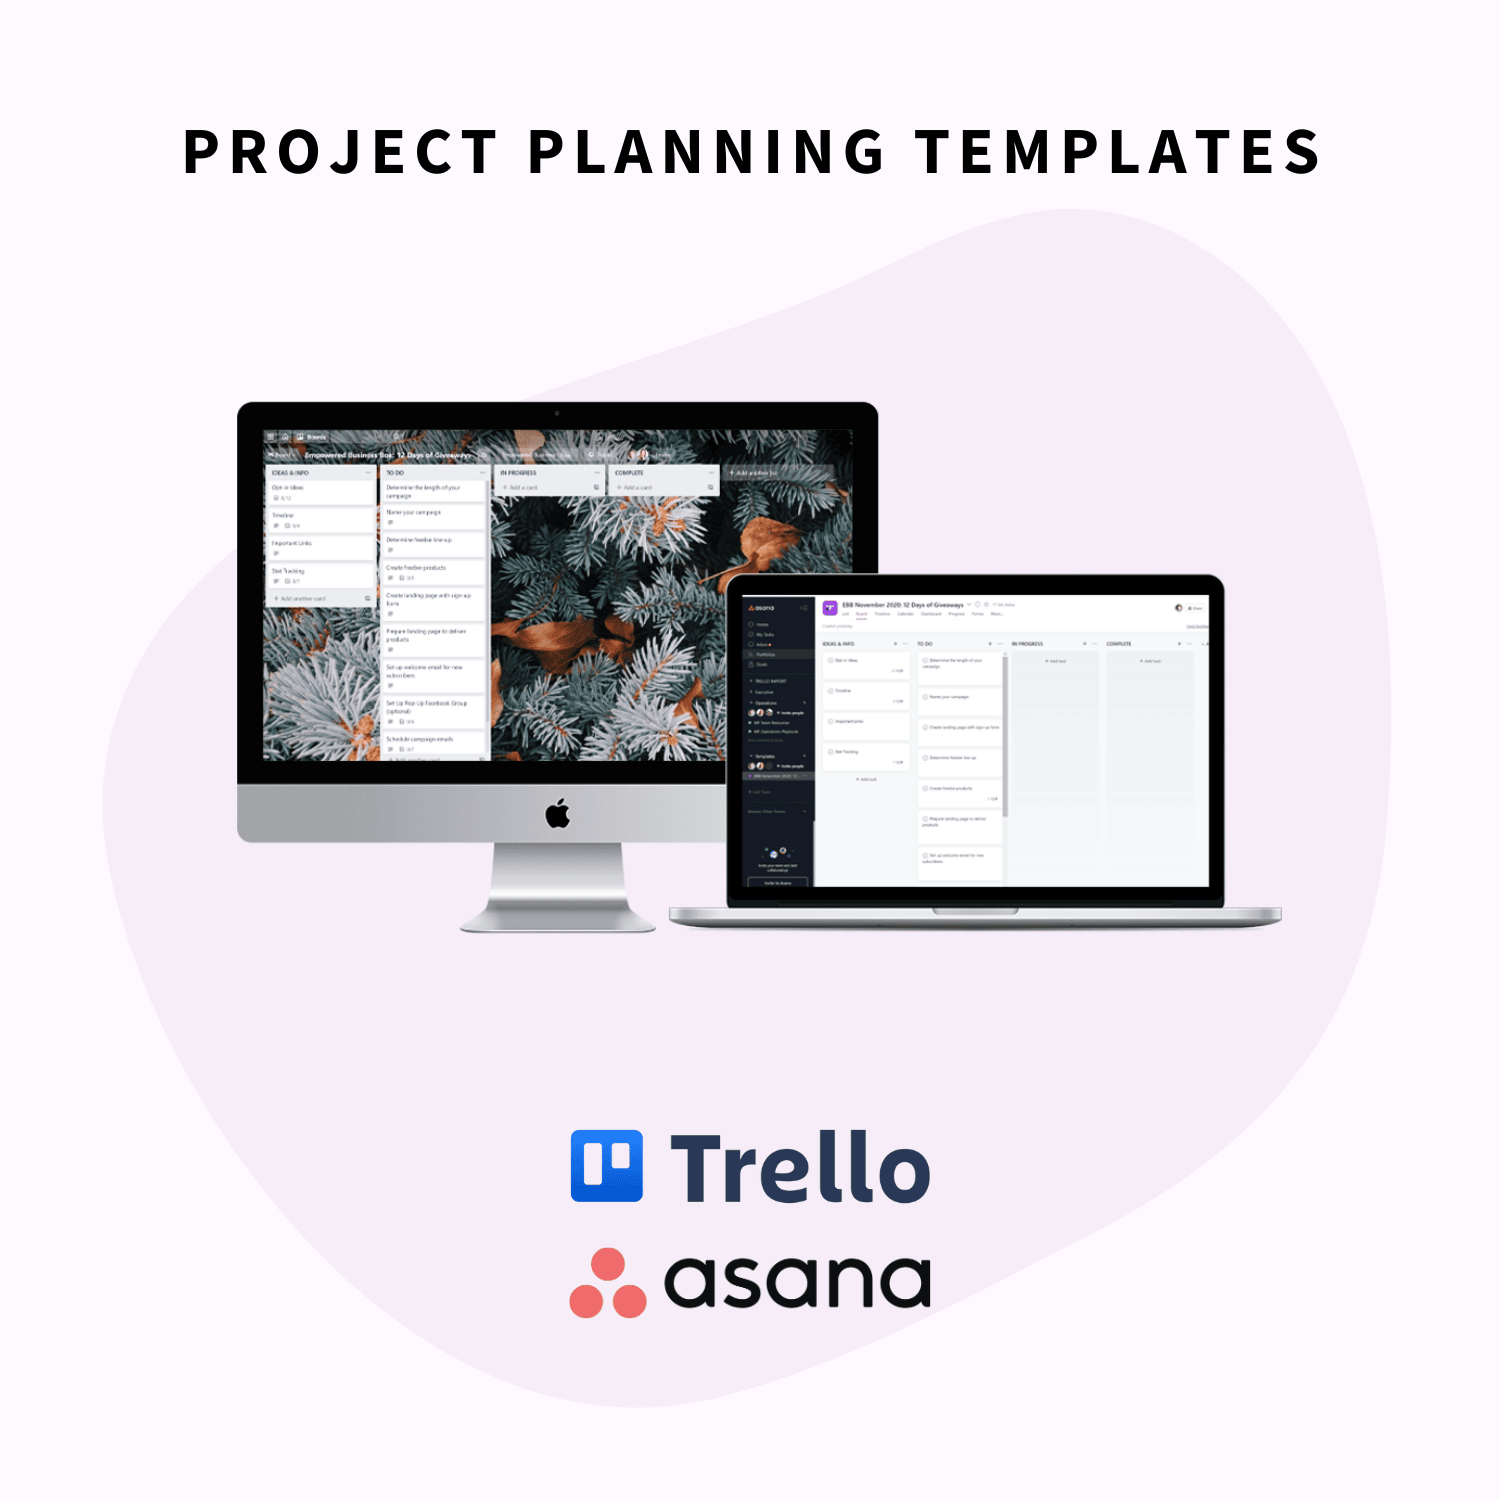 12 Days of Giveaways toolbox project planning templates in trello or asana